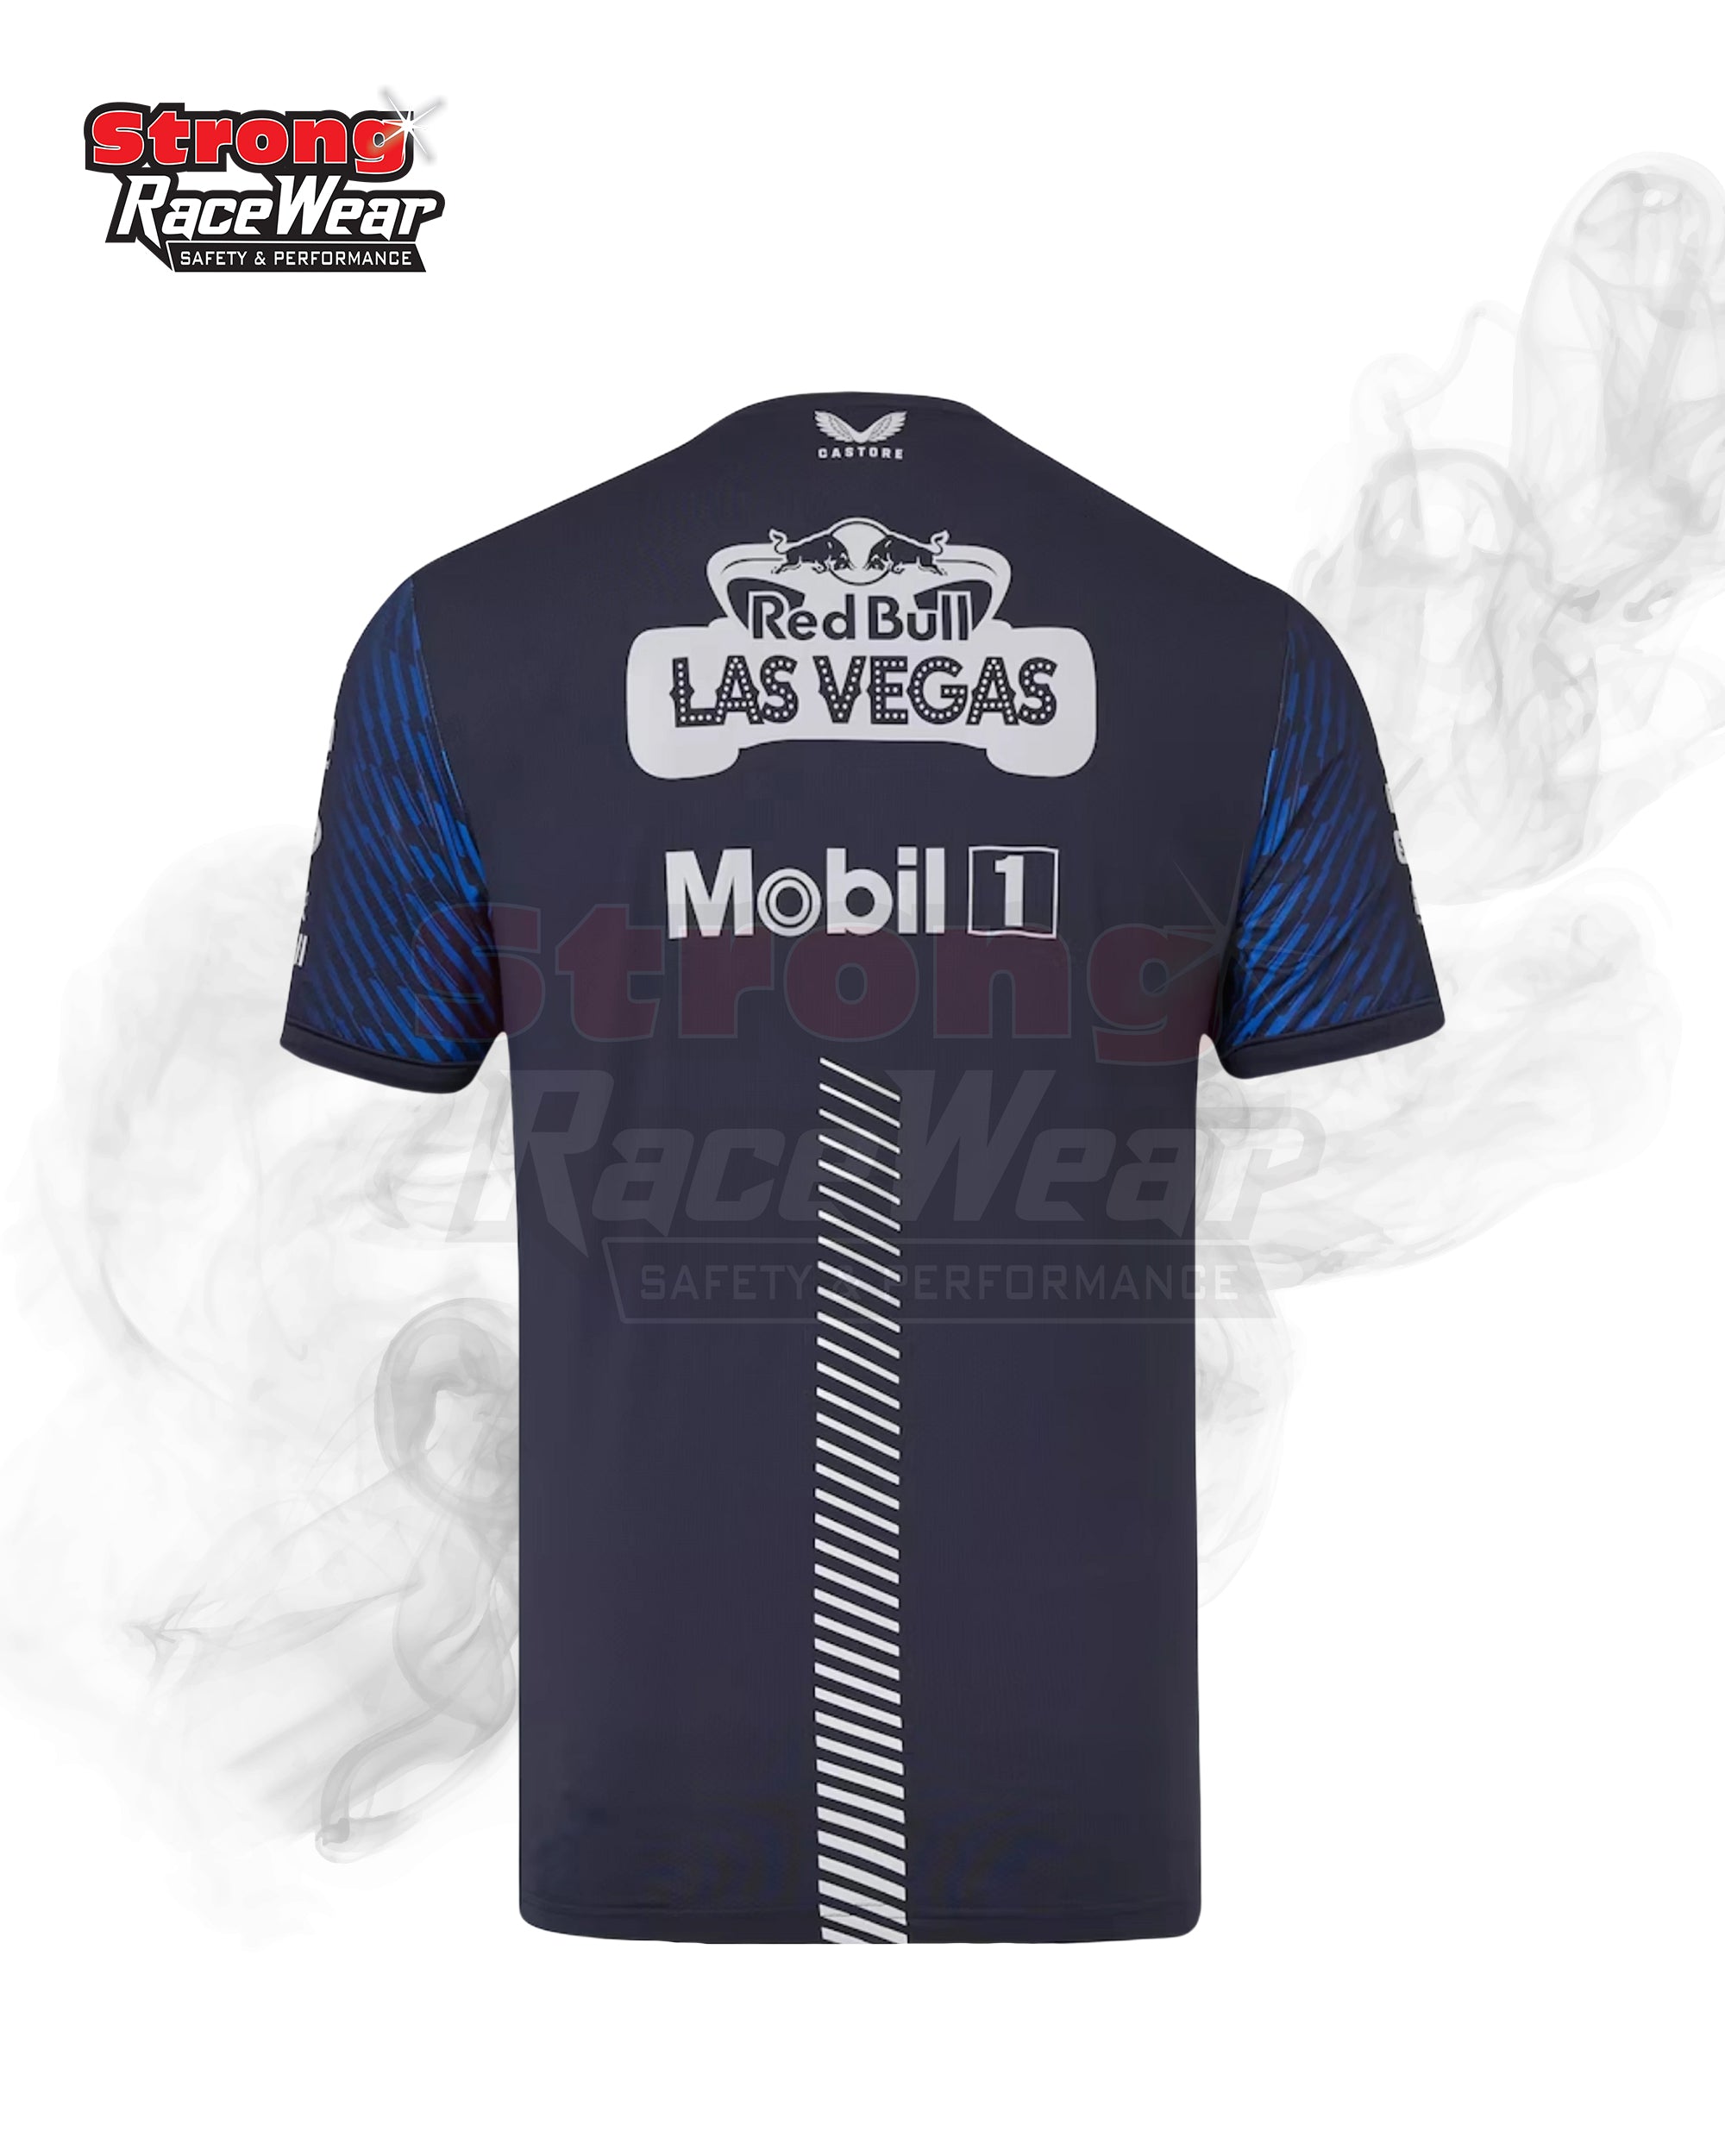 Oracle Red Bull Racing Special Edition Las Vegas Set Up T-Shirt